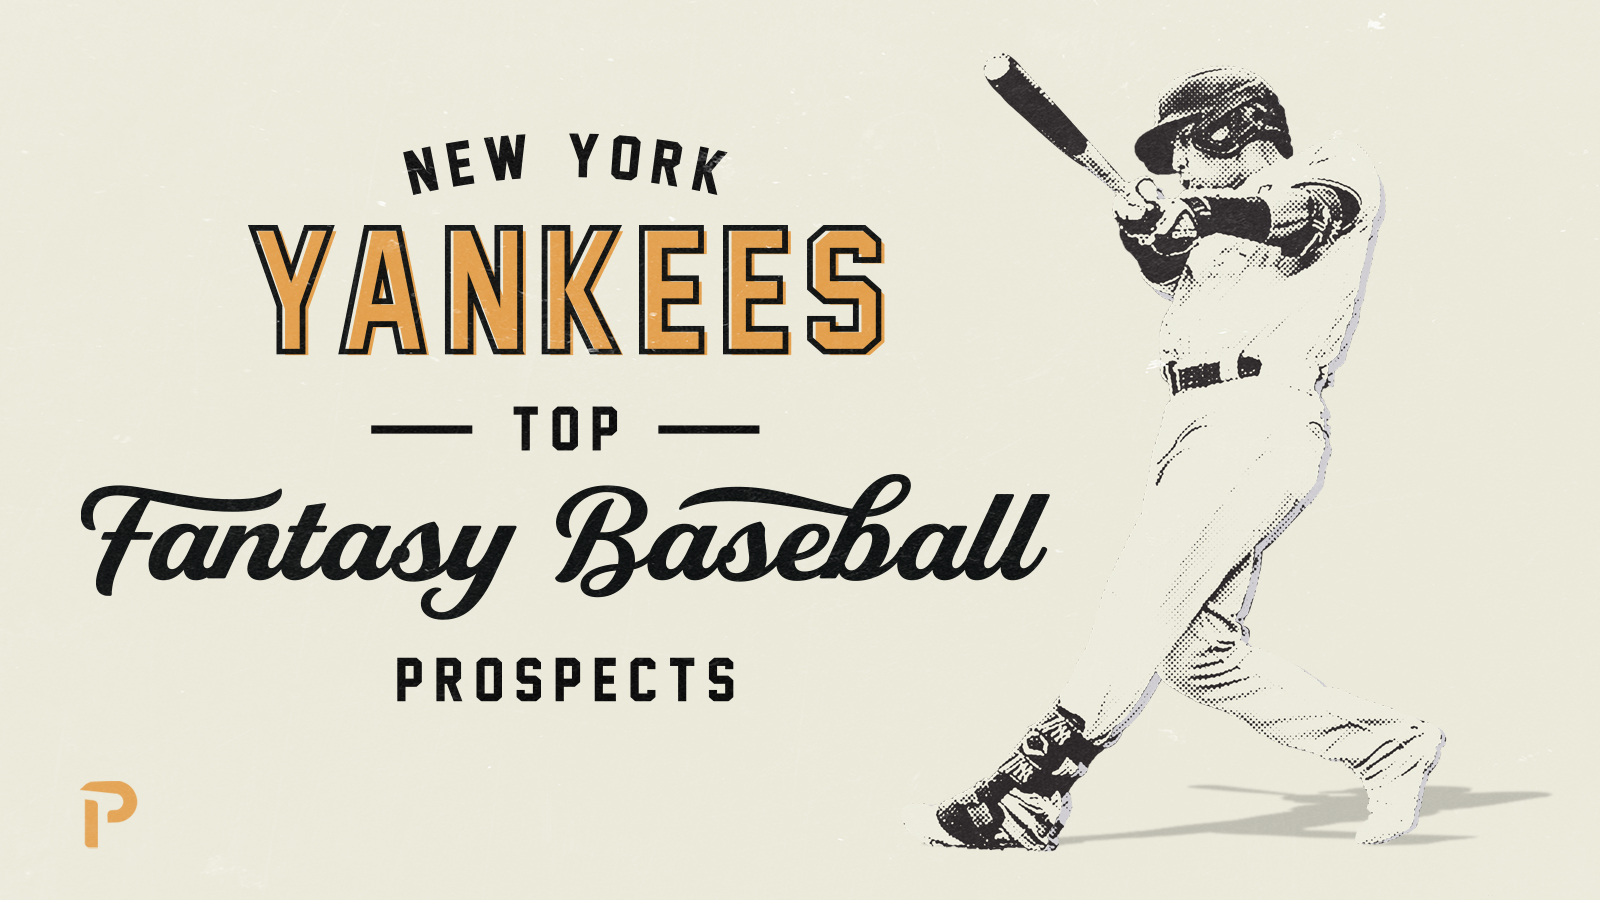 Drew Thorpe leads next wave of Yankees prospects